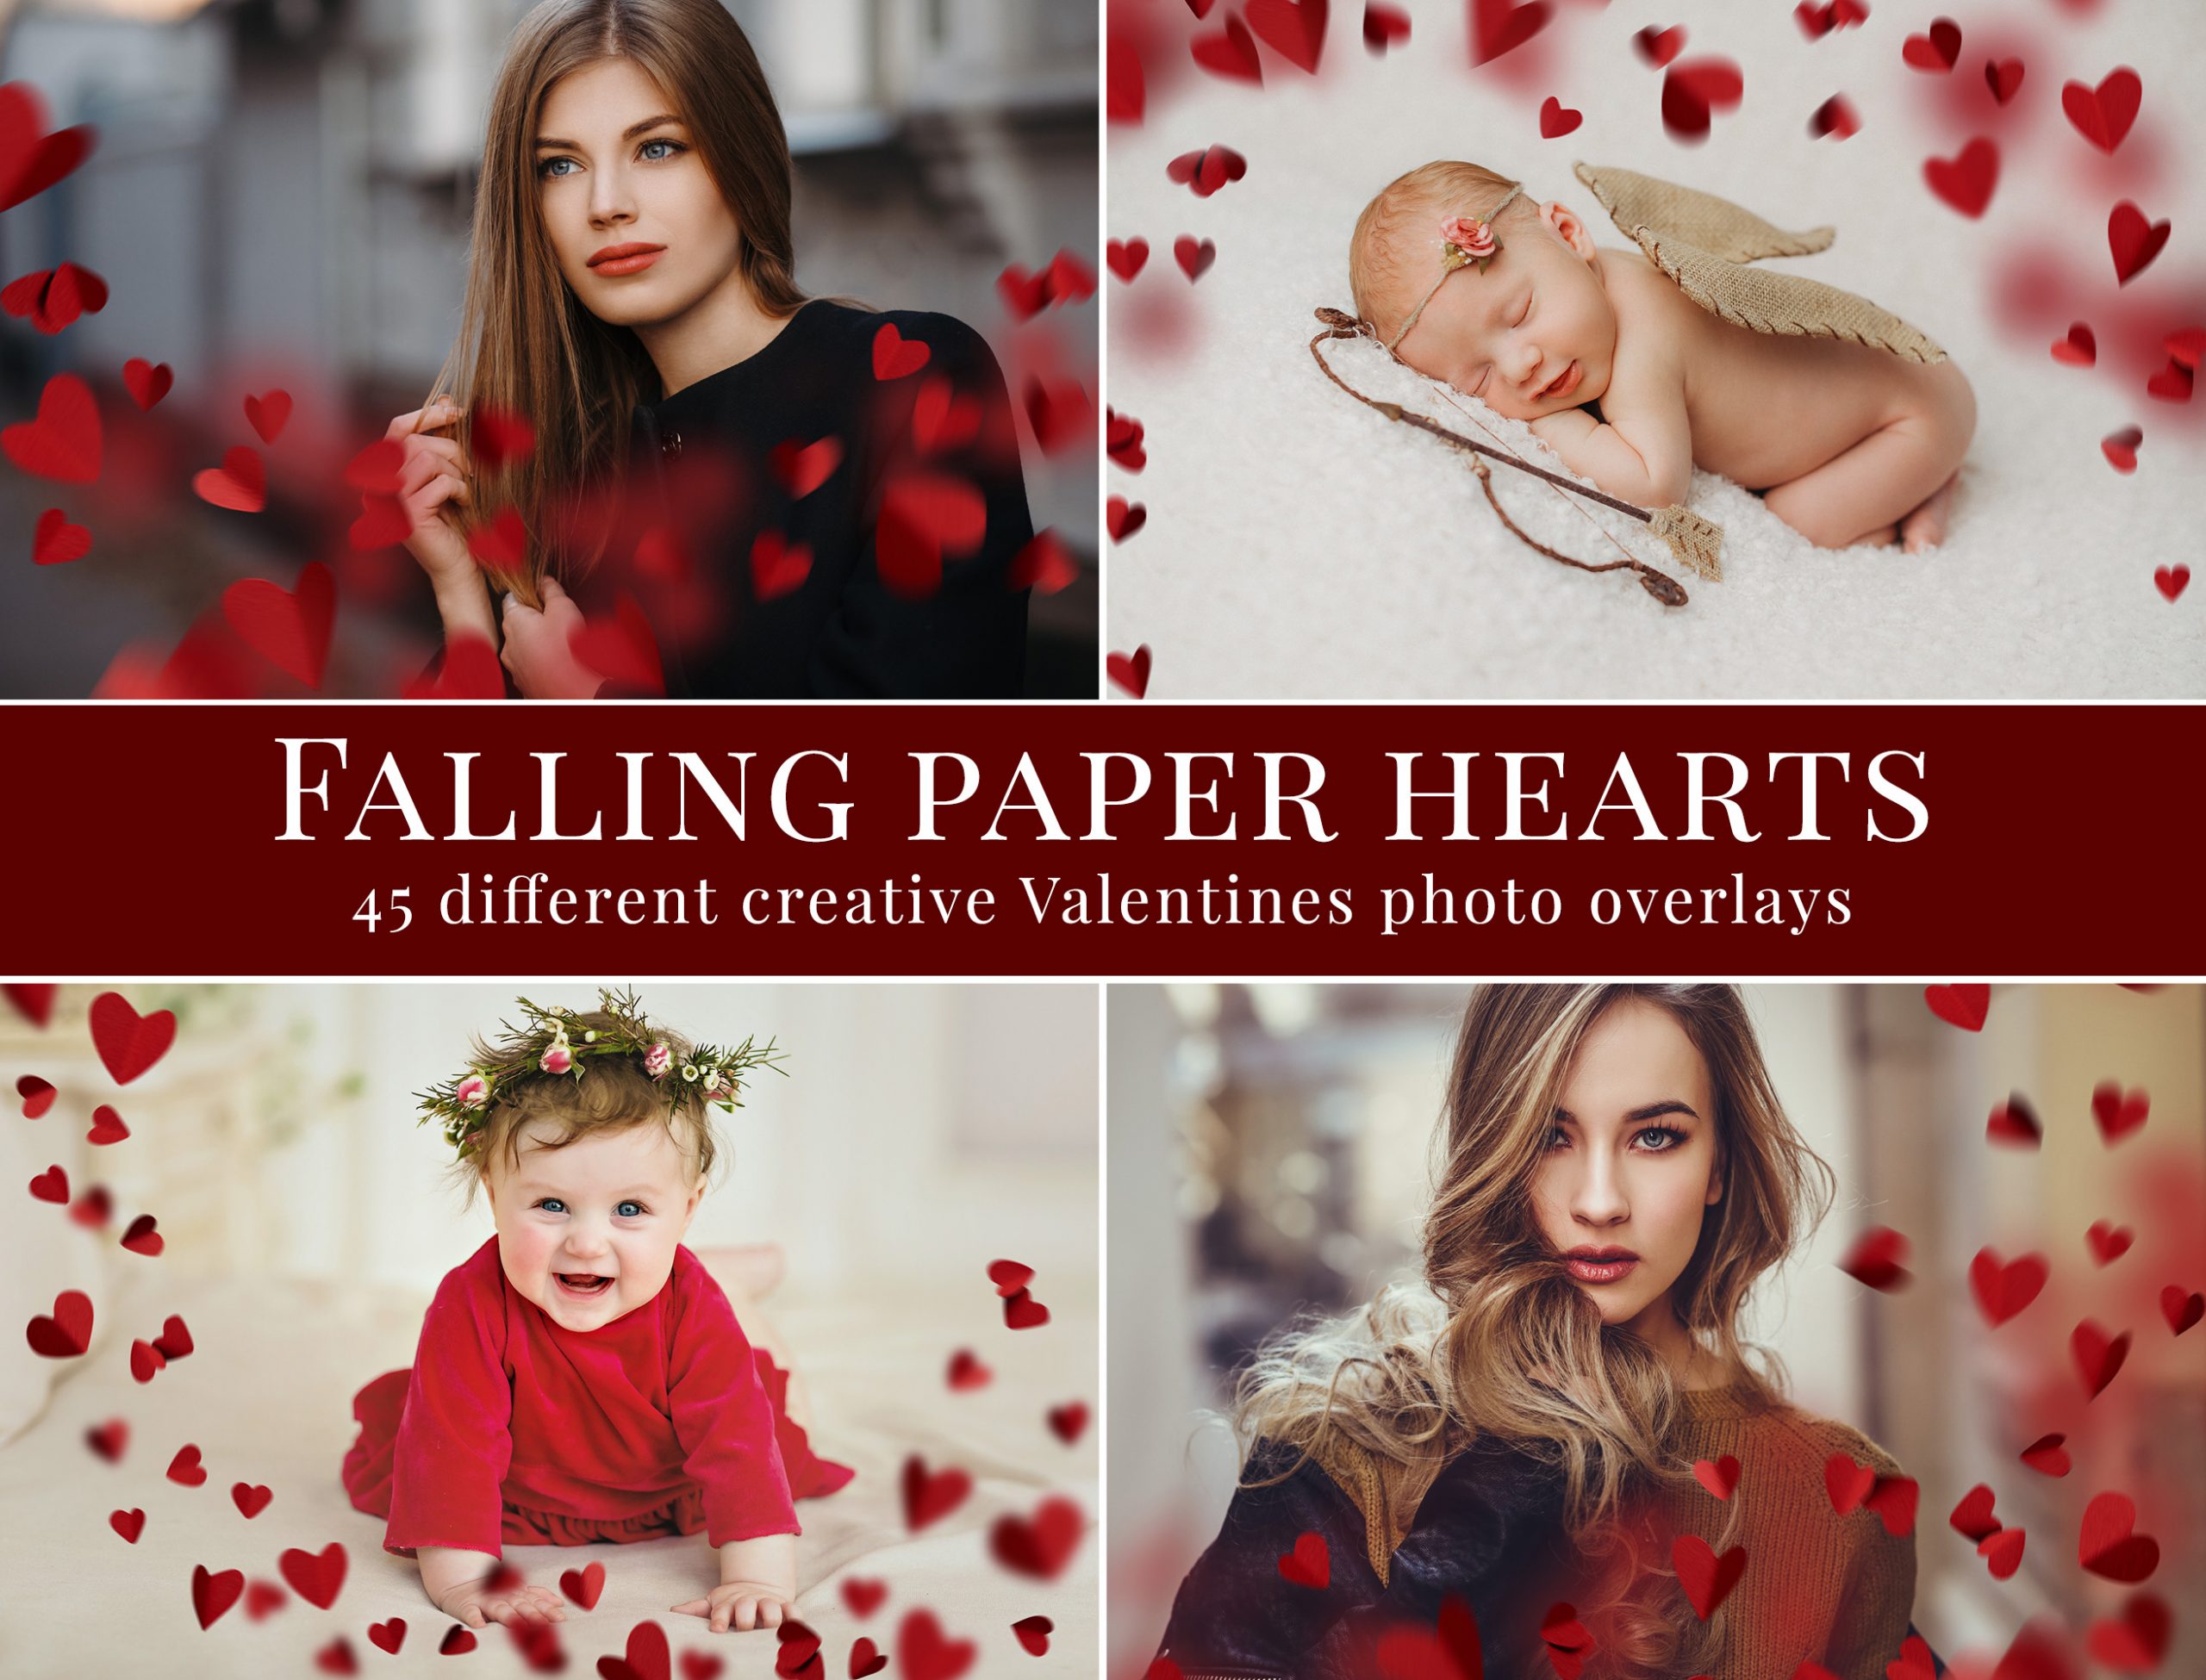 Falling Paper Hearts photo overlays